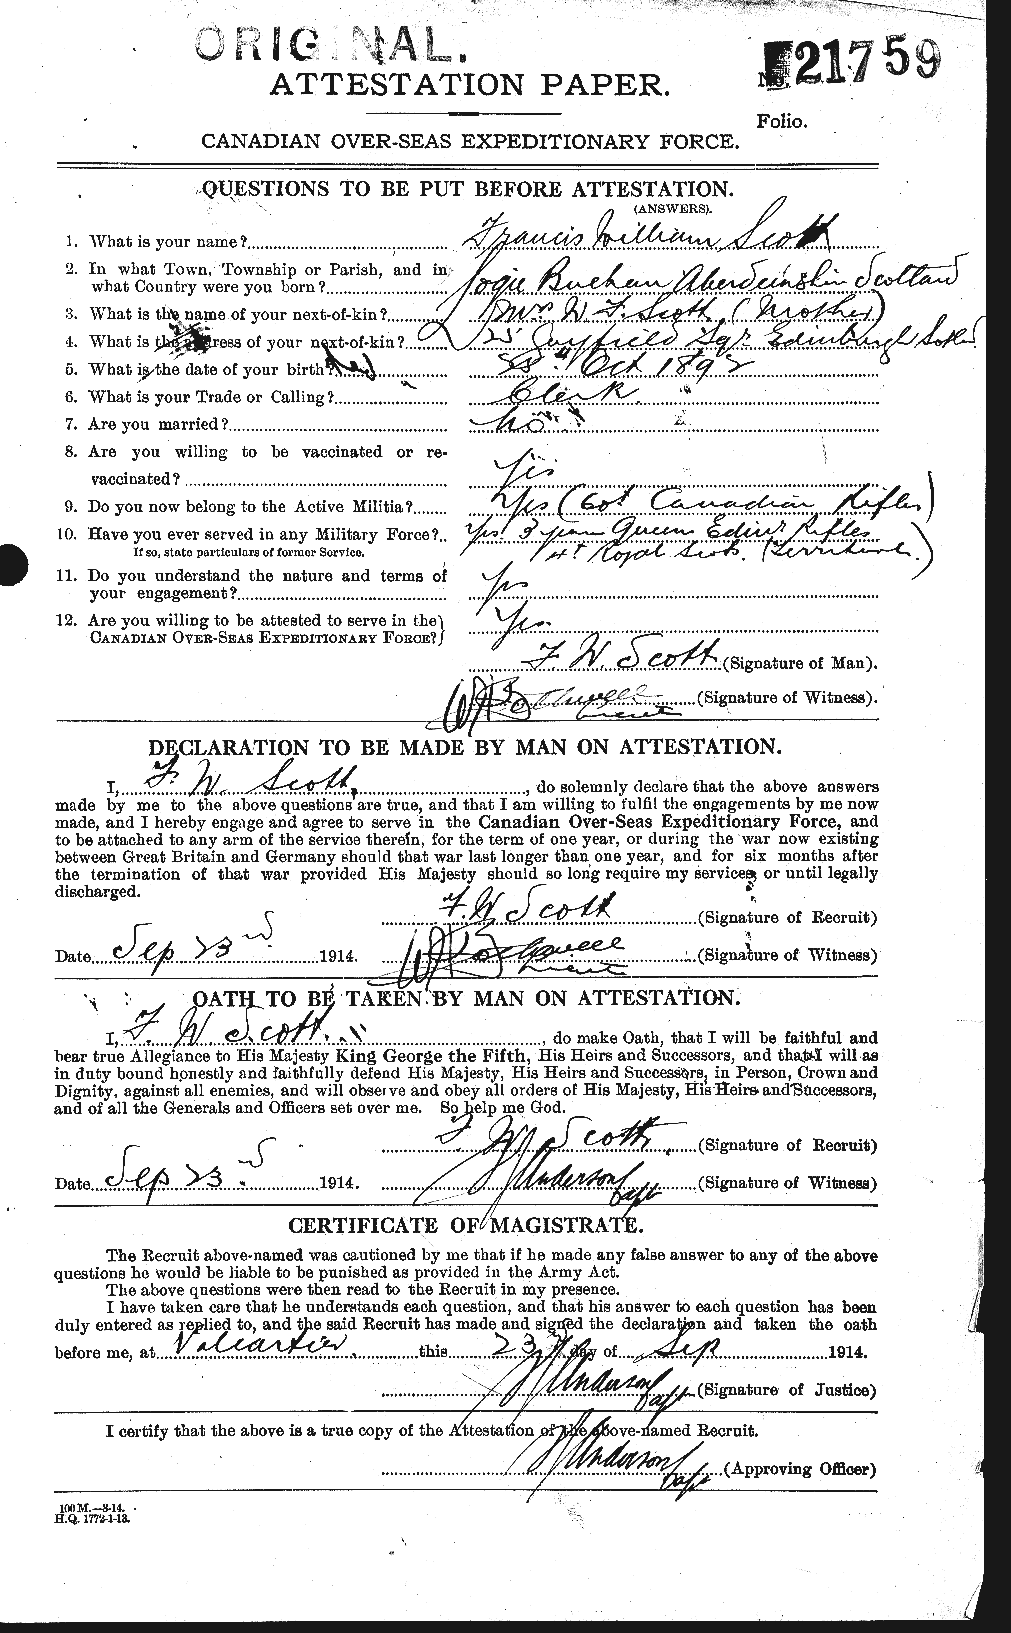 Personnel Records of the First World War - CEF 084716a